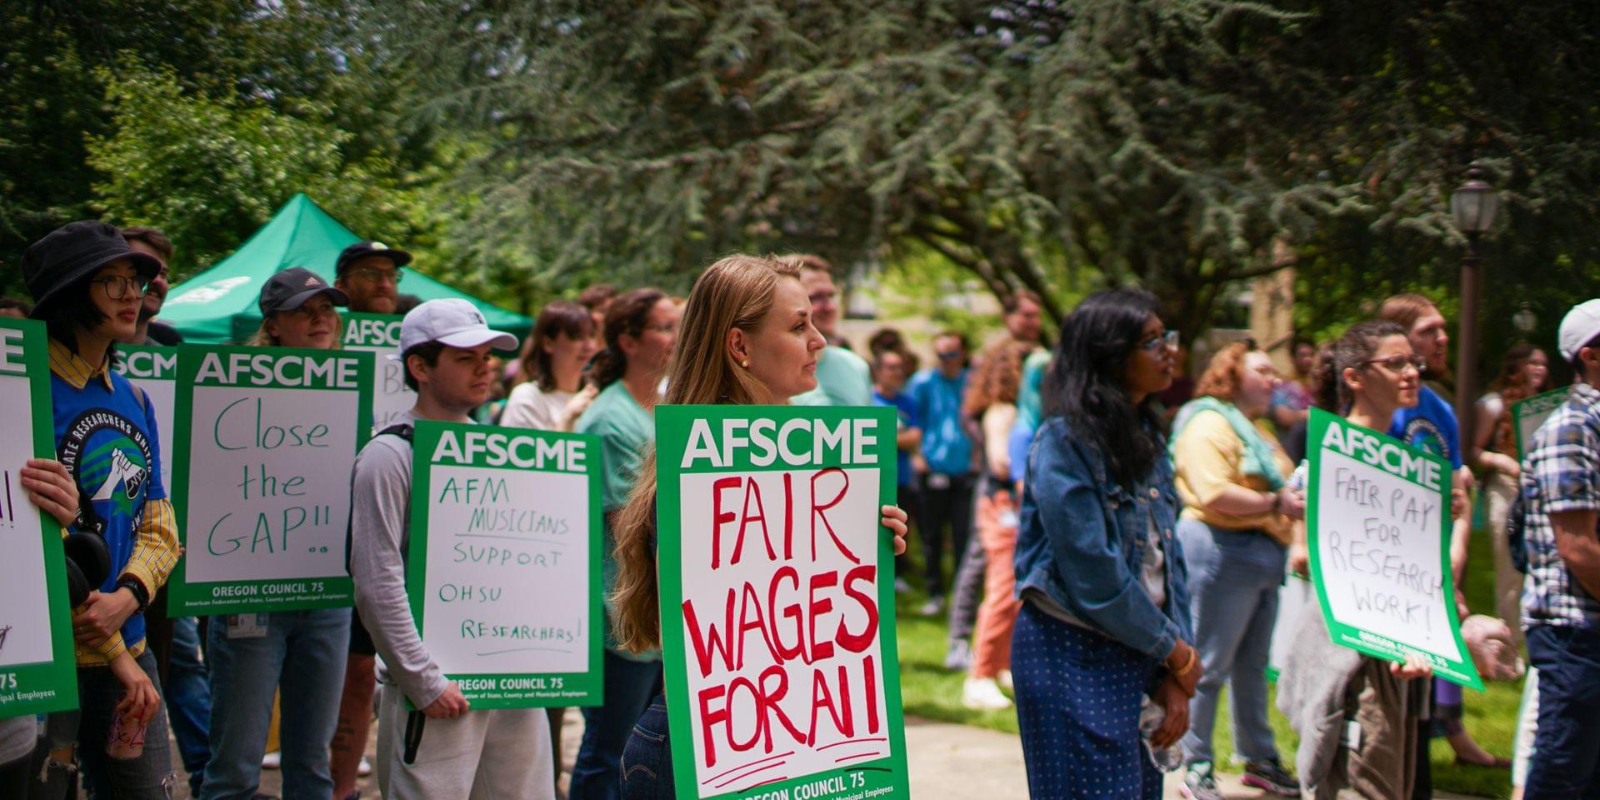 Medical university research workers seek to build power through Oregon AFSCME